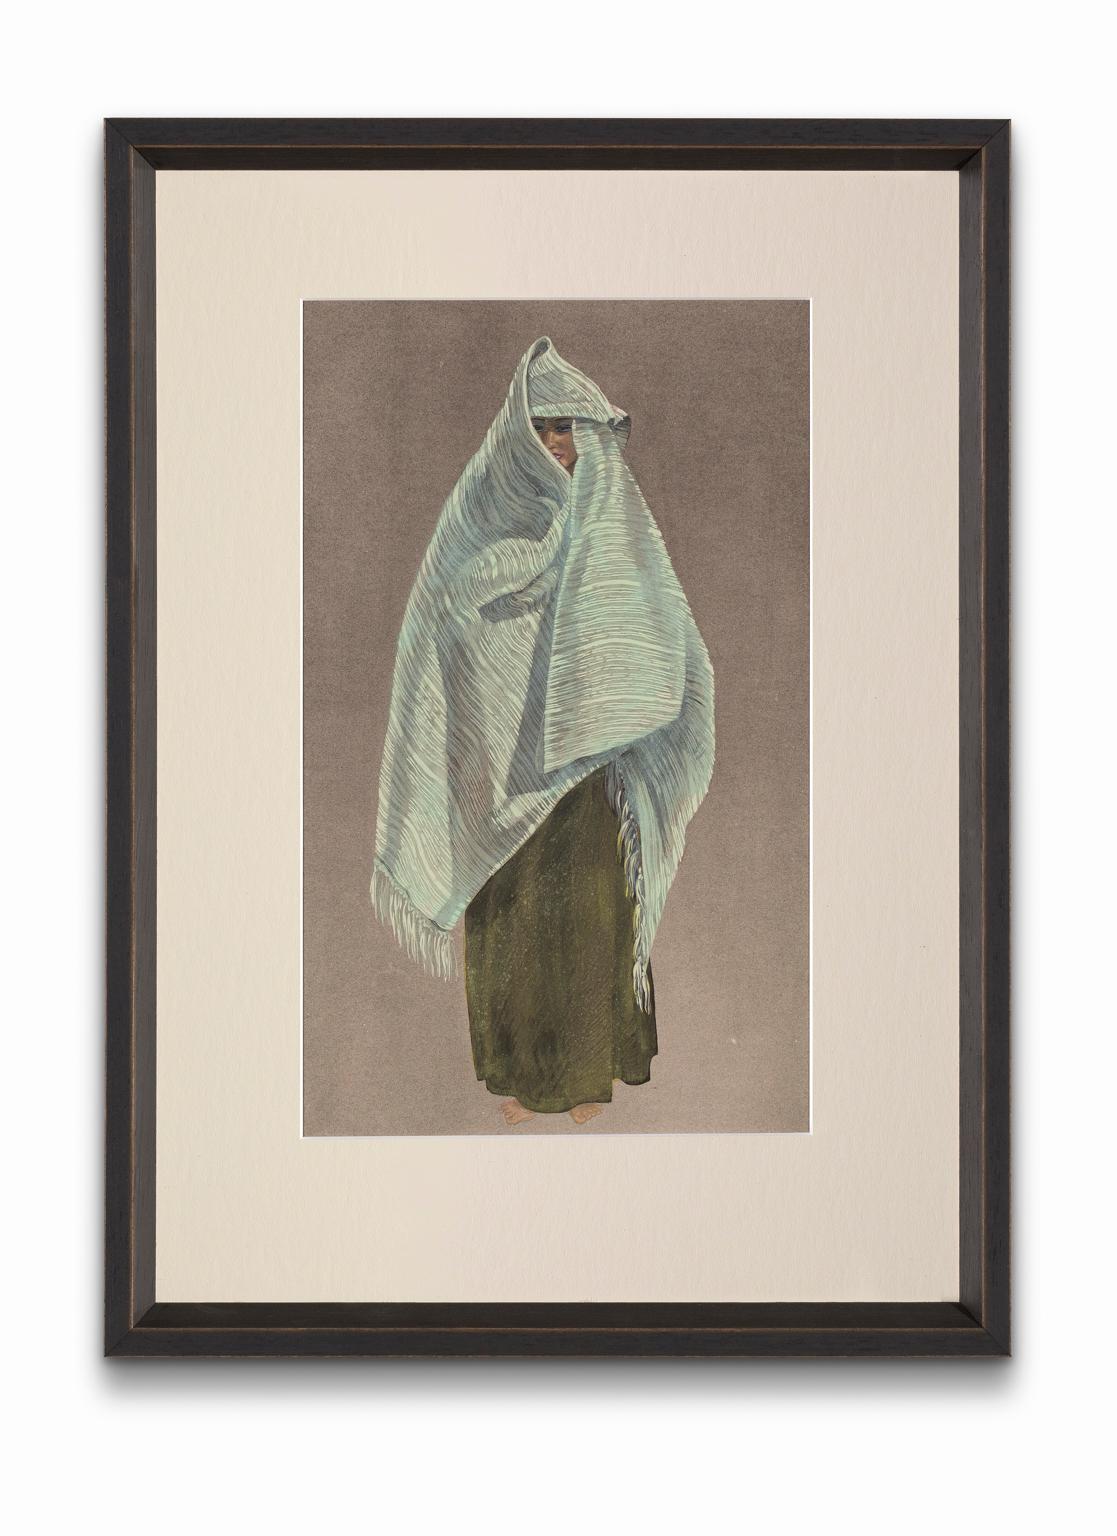 "Woman of Tiznit Wearing the Amendil", from "Costumes of Morocco"